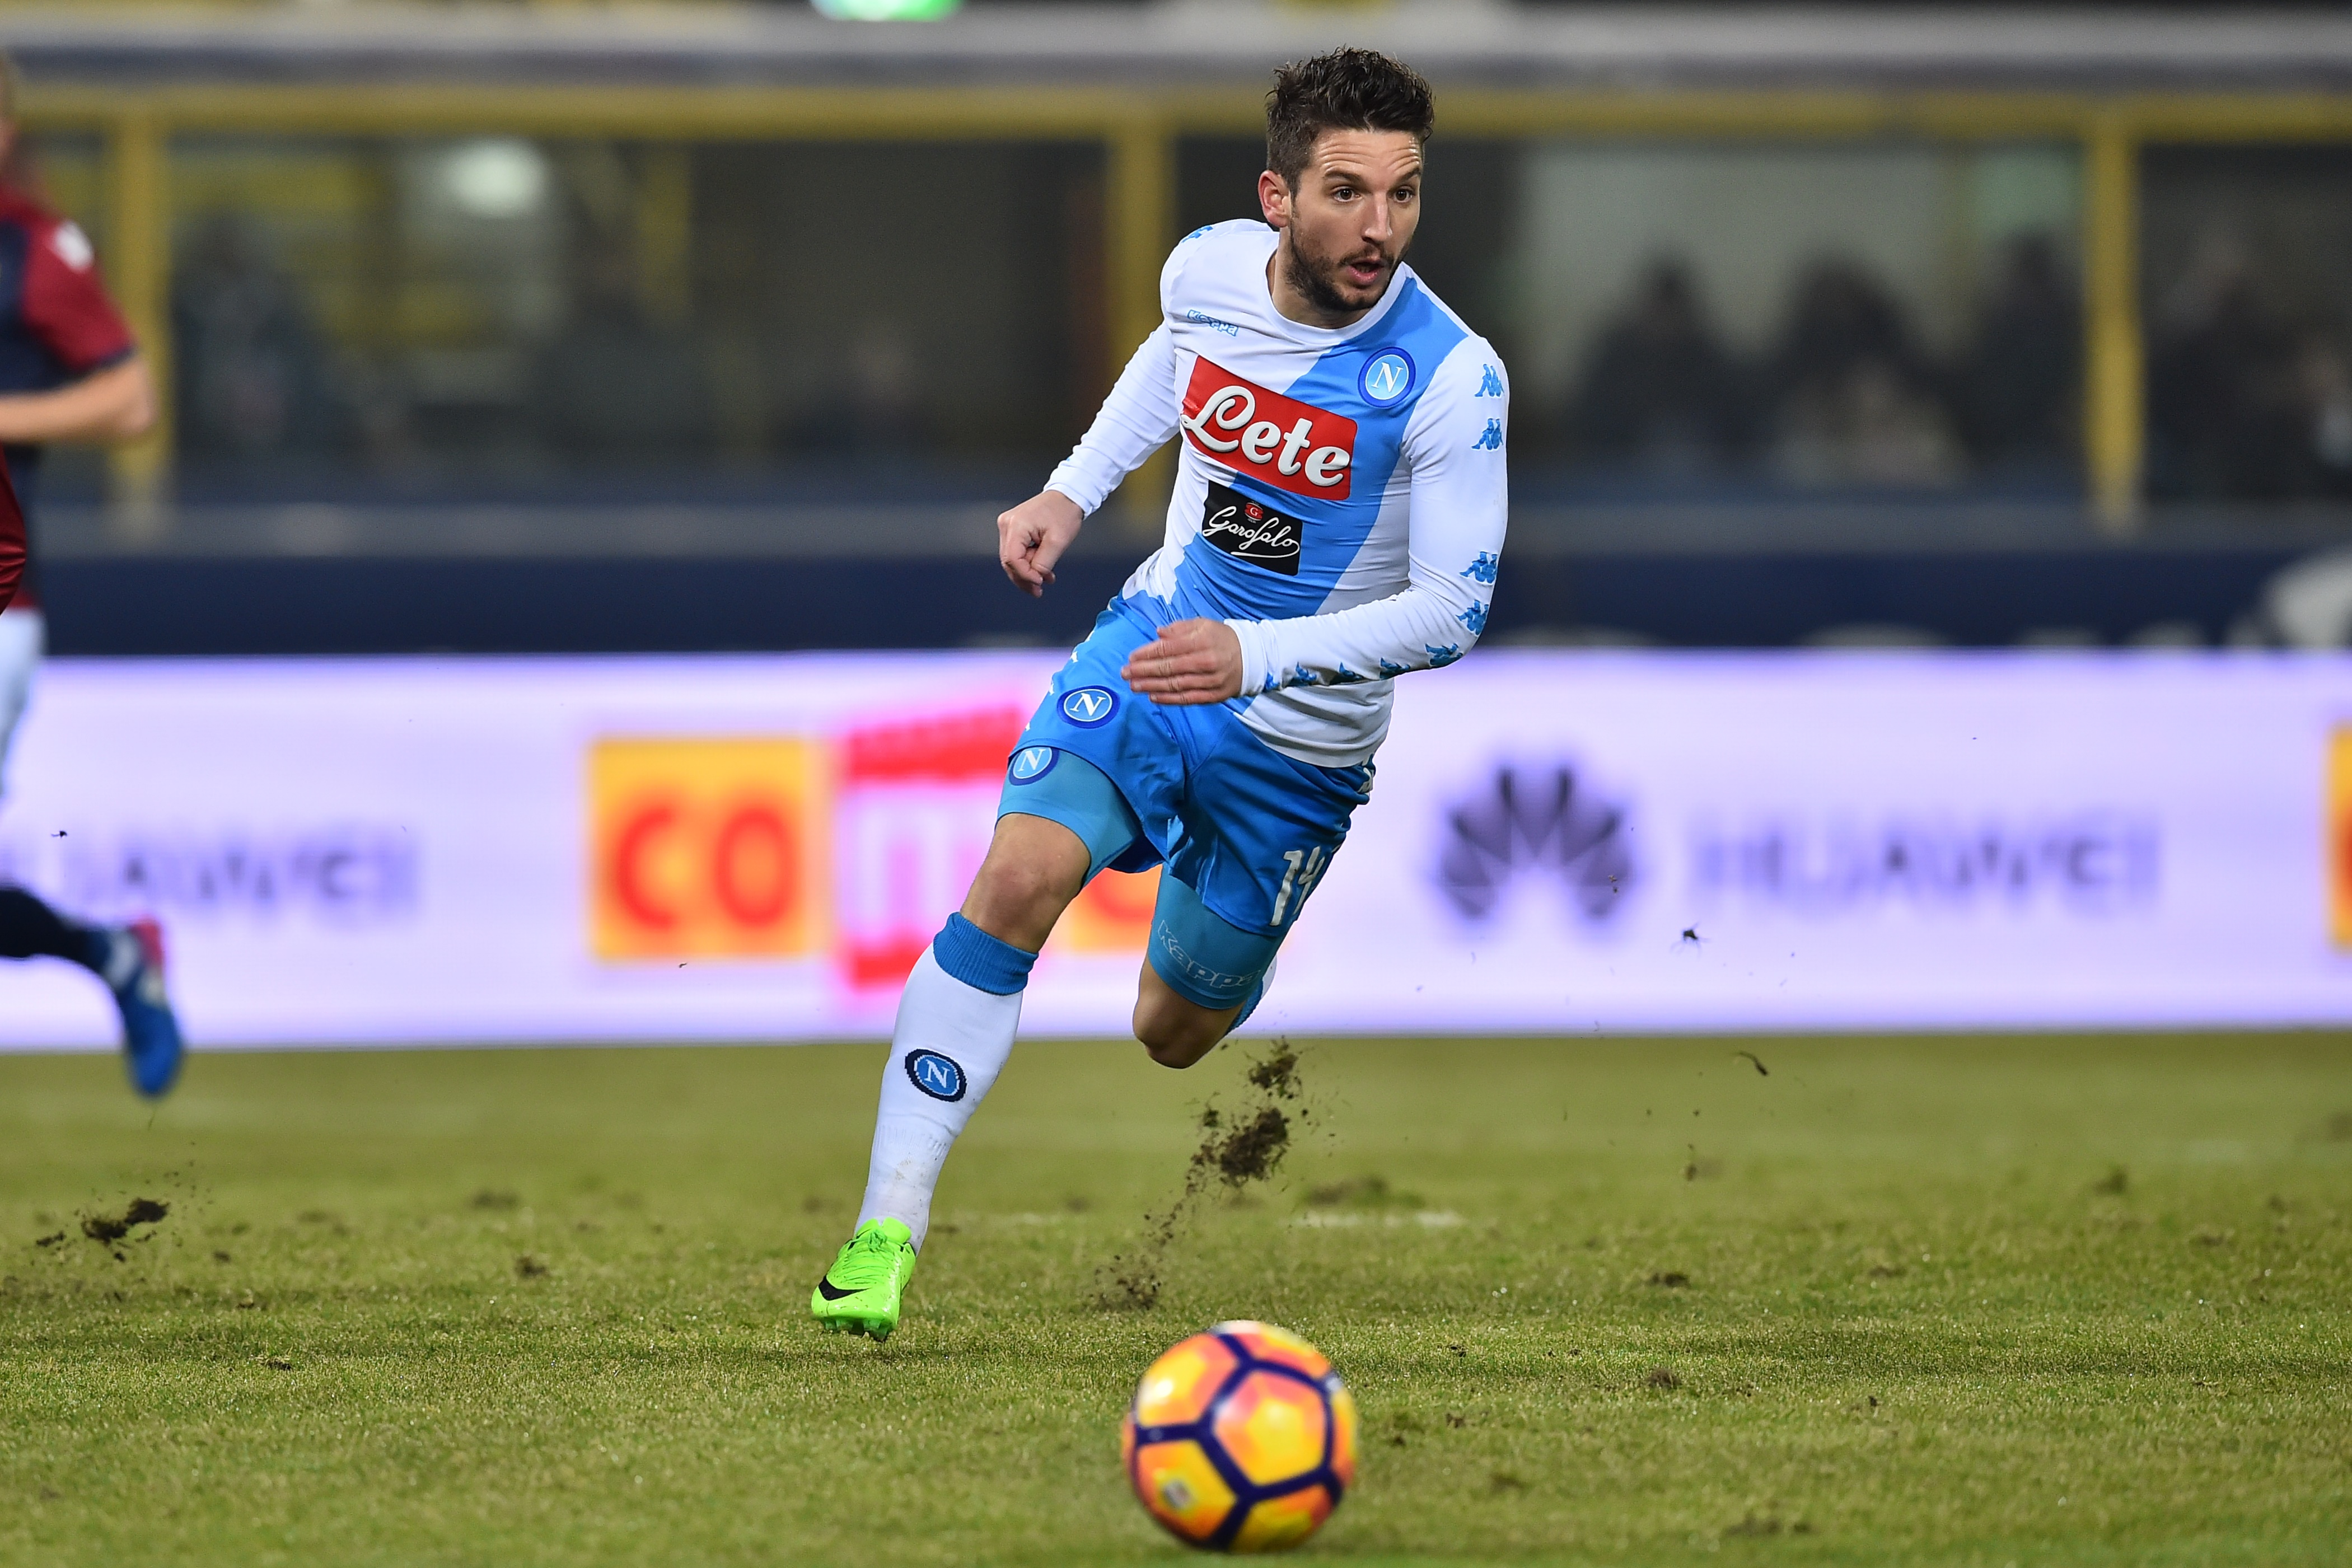 Napoli's forward from Belgium Dries Mertens controls the ball during the Italian Serie A football match Bologna vs Napoli at "Renato Dall'Ara Stadium" in Bologna on February 4, 2017.  / AFP / GIUSEPPE CACACE        (Photo credit should read GIUSEPPE CACACE/AFP/Getty Images)